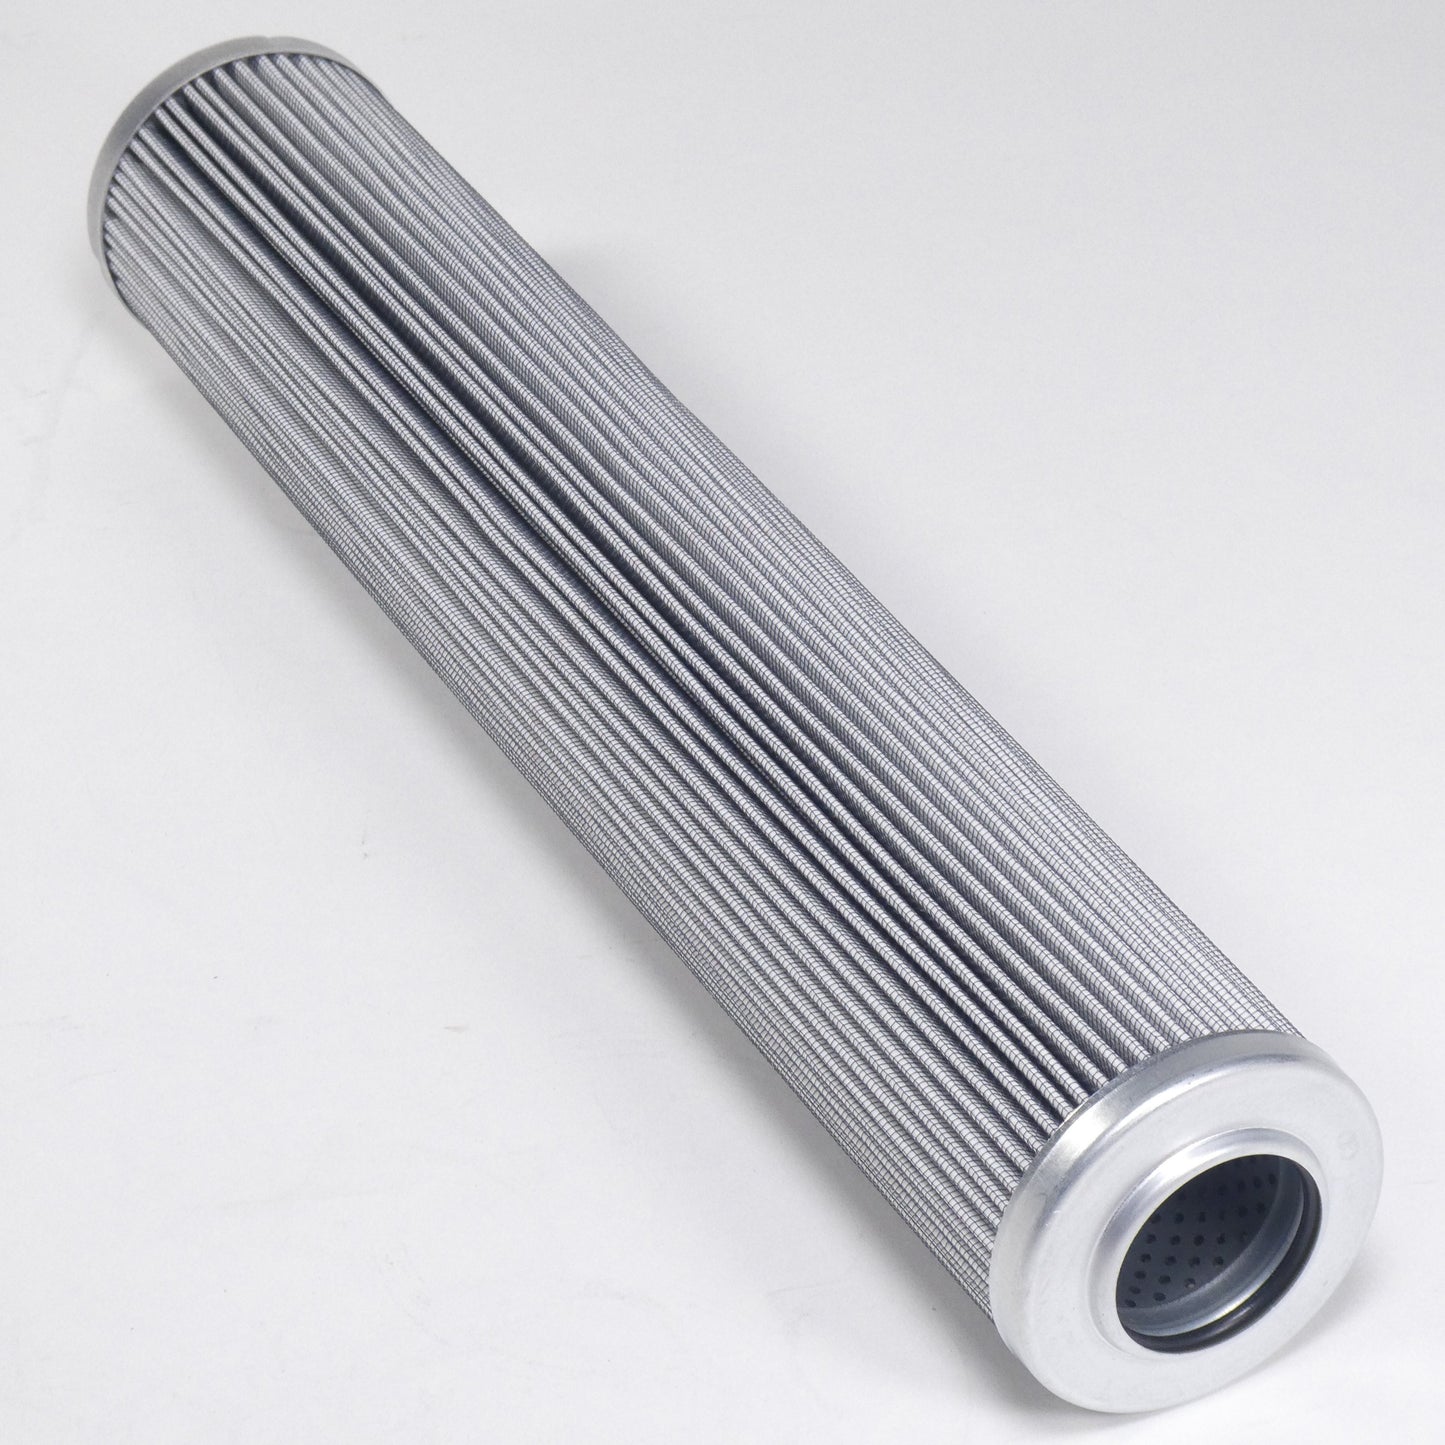 Hydrafil Replacement Filter Element for Pall HC9600FAS16H